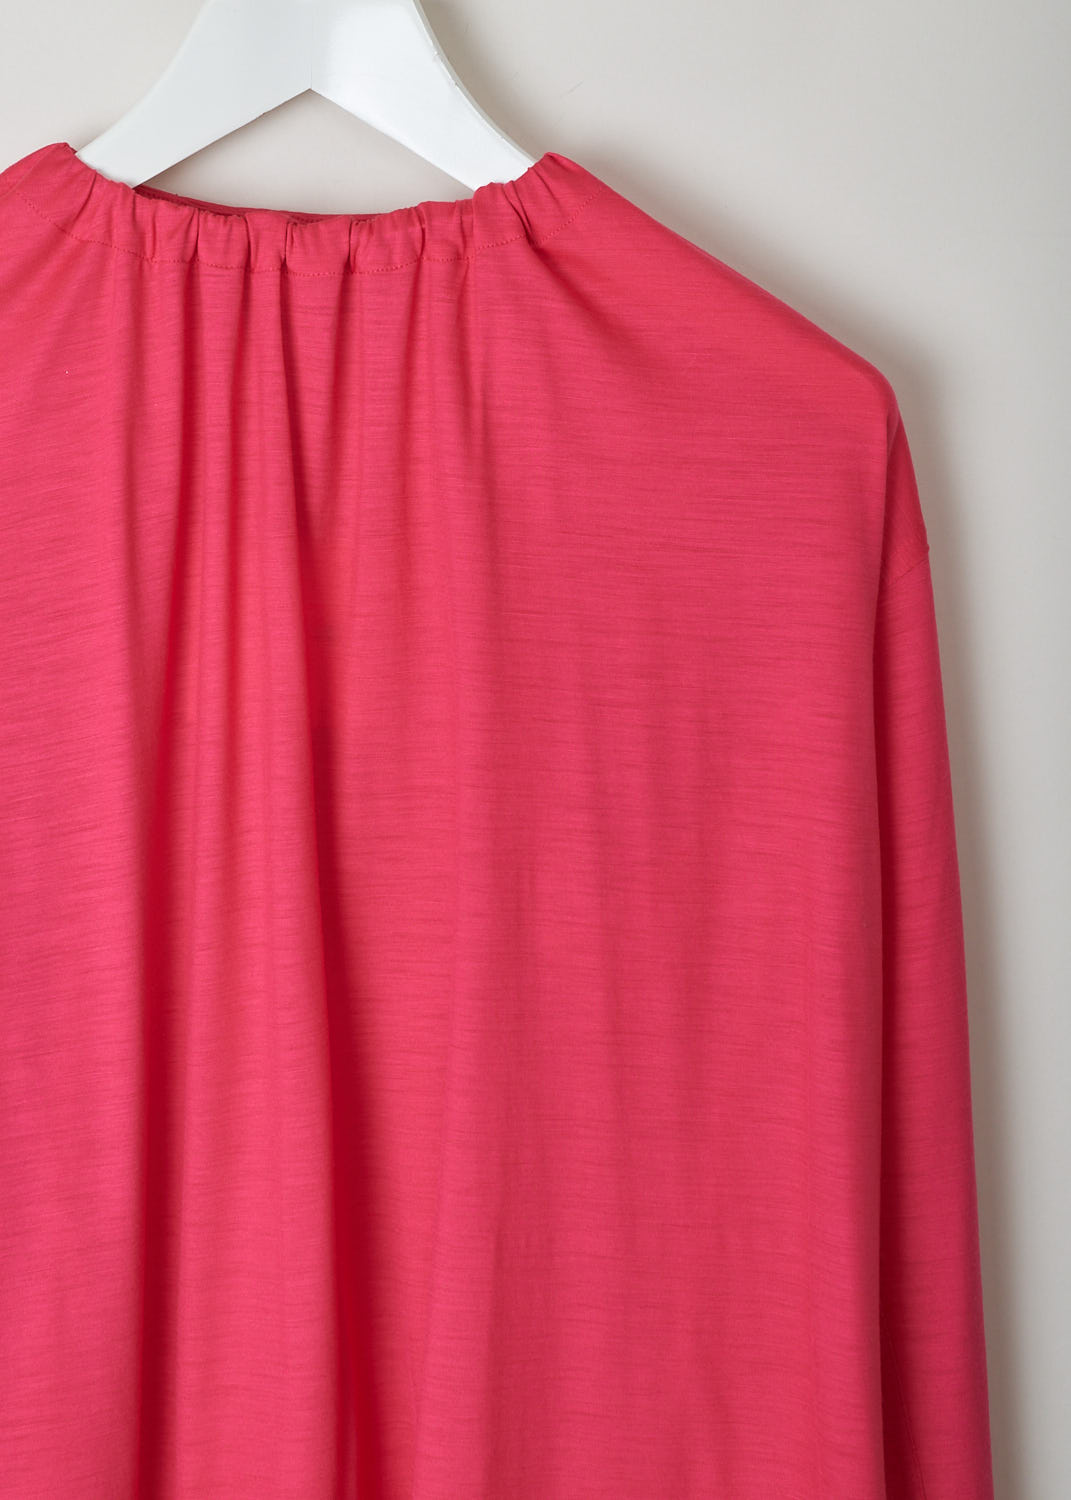 SOFIE Dâ€™HOORE, LONG SLEEVE FUCHSIA TOP, BRIANNA_WOJE_FUCHSIA, Pink, Detail, This fuchsia colored top features a gathered elasticated neckline. The long sleeve top drapes the bodice, creating a relaxed fit. 
